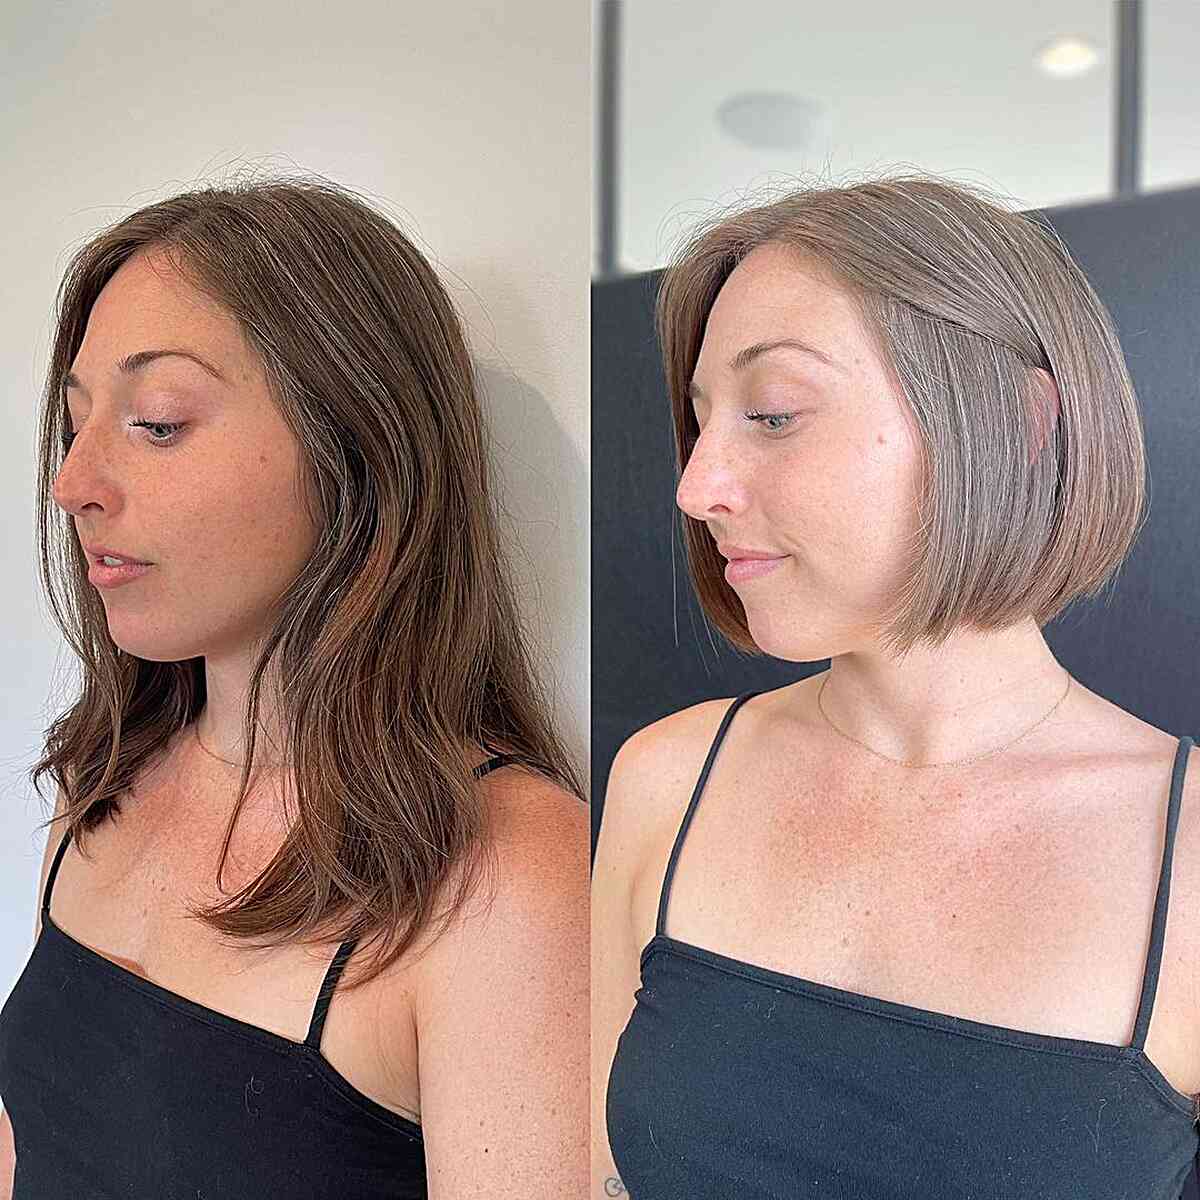 Chin-length lob with highlights